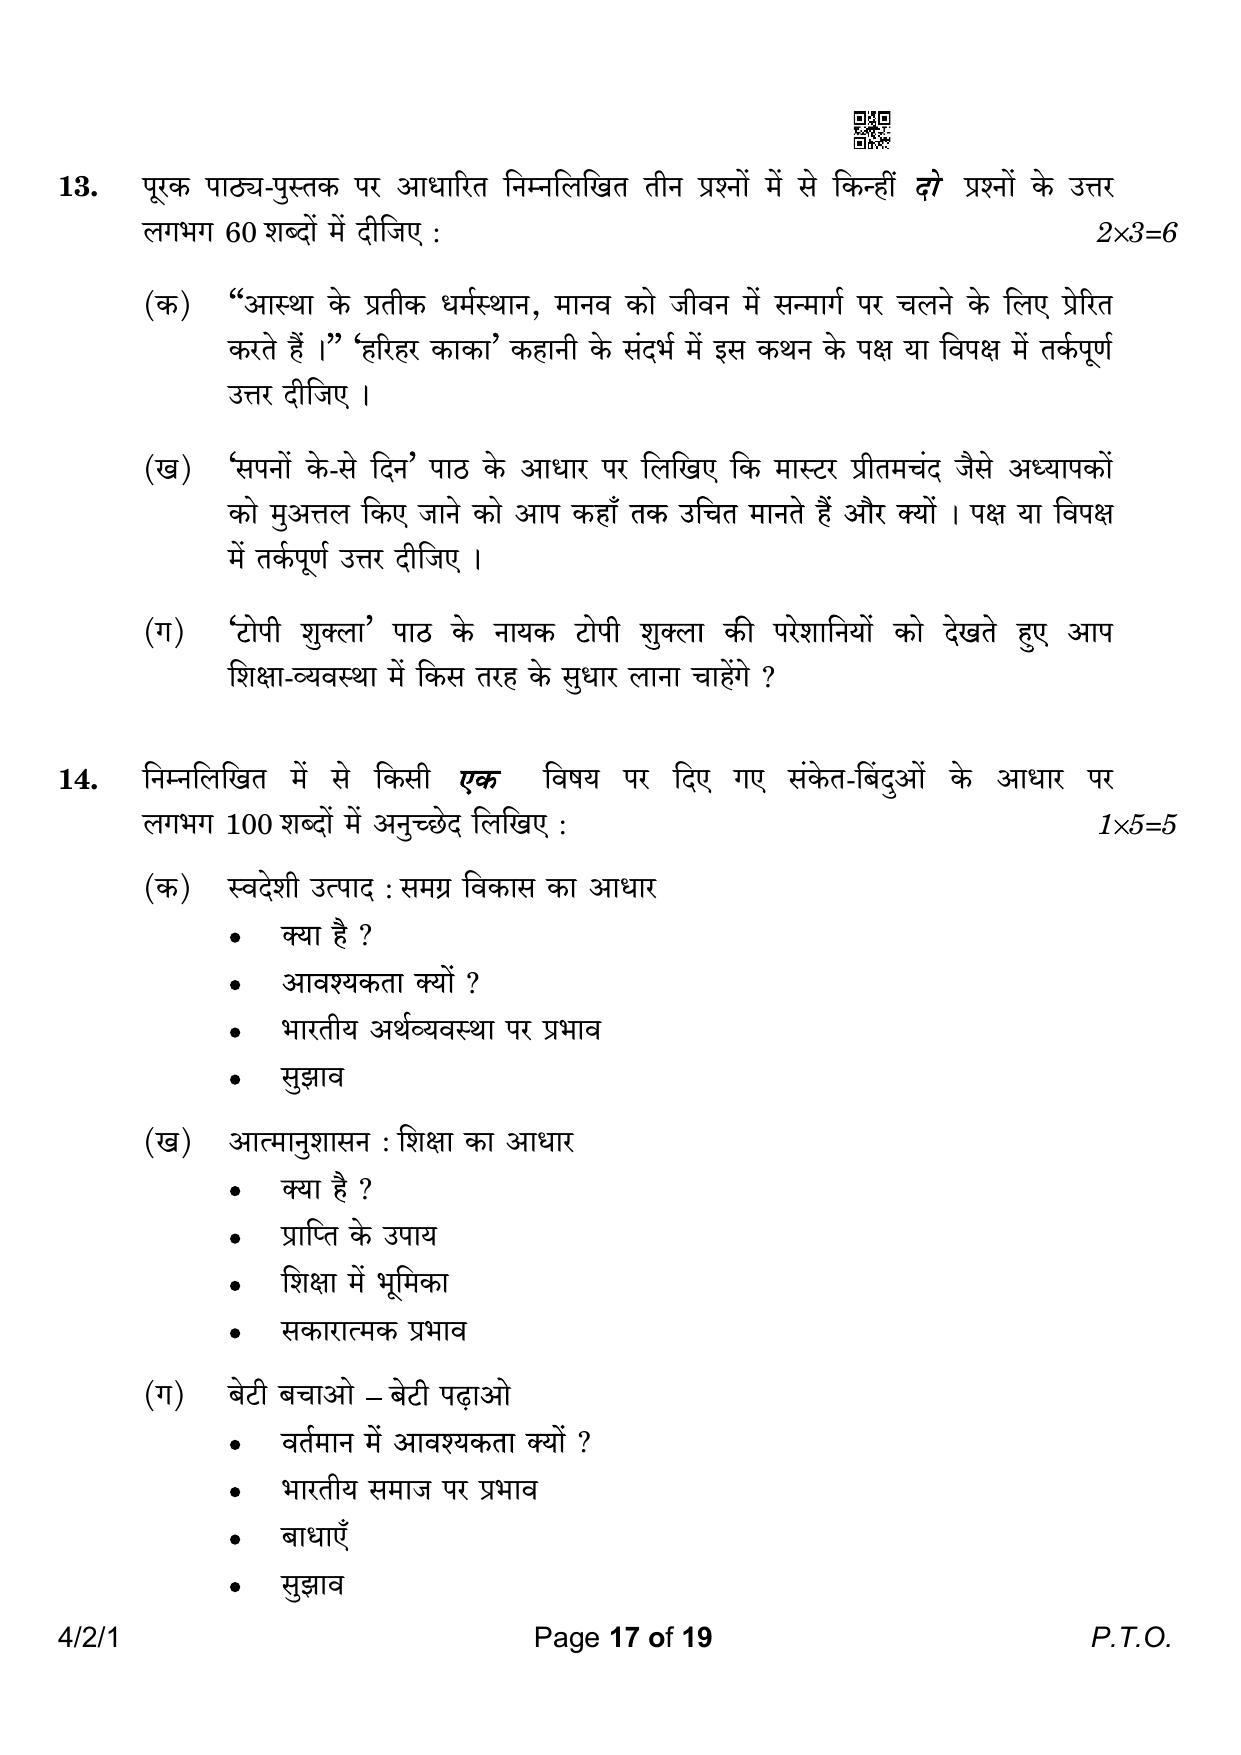 CBSE Class 10 4-2-1 Hindi B 2023 Question Paper - Page 17